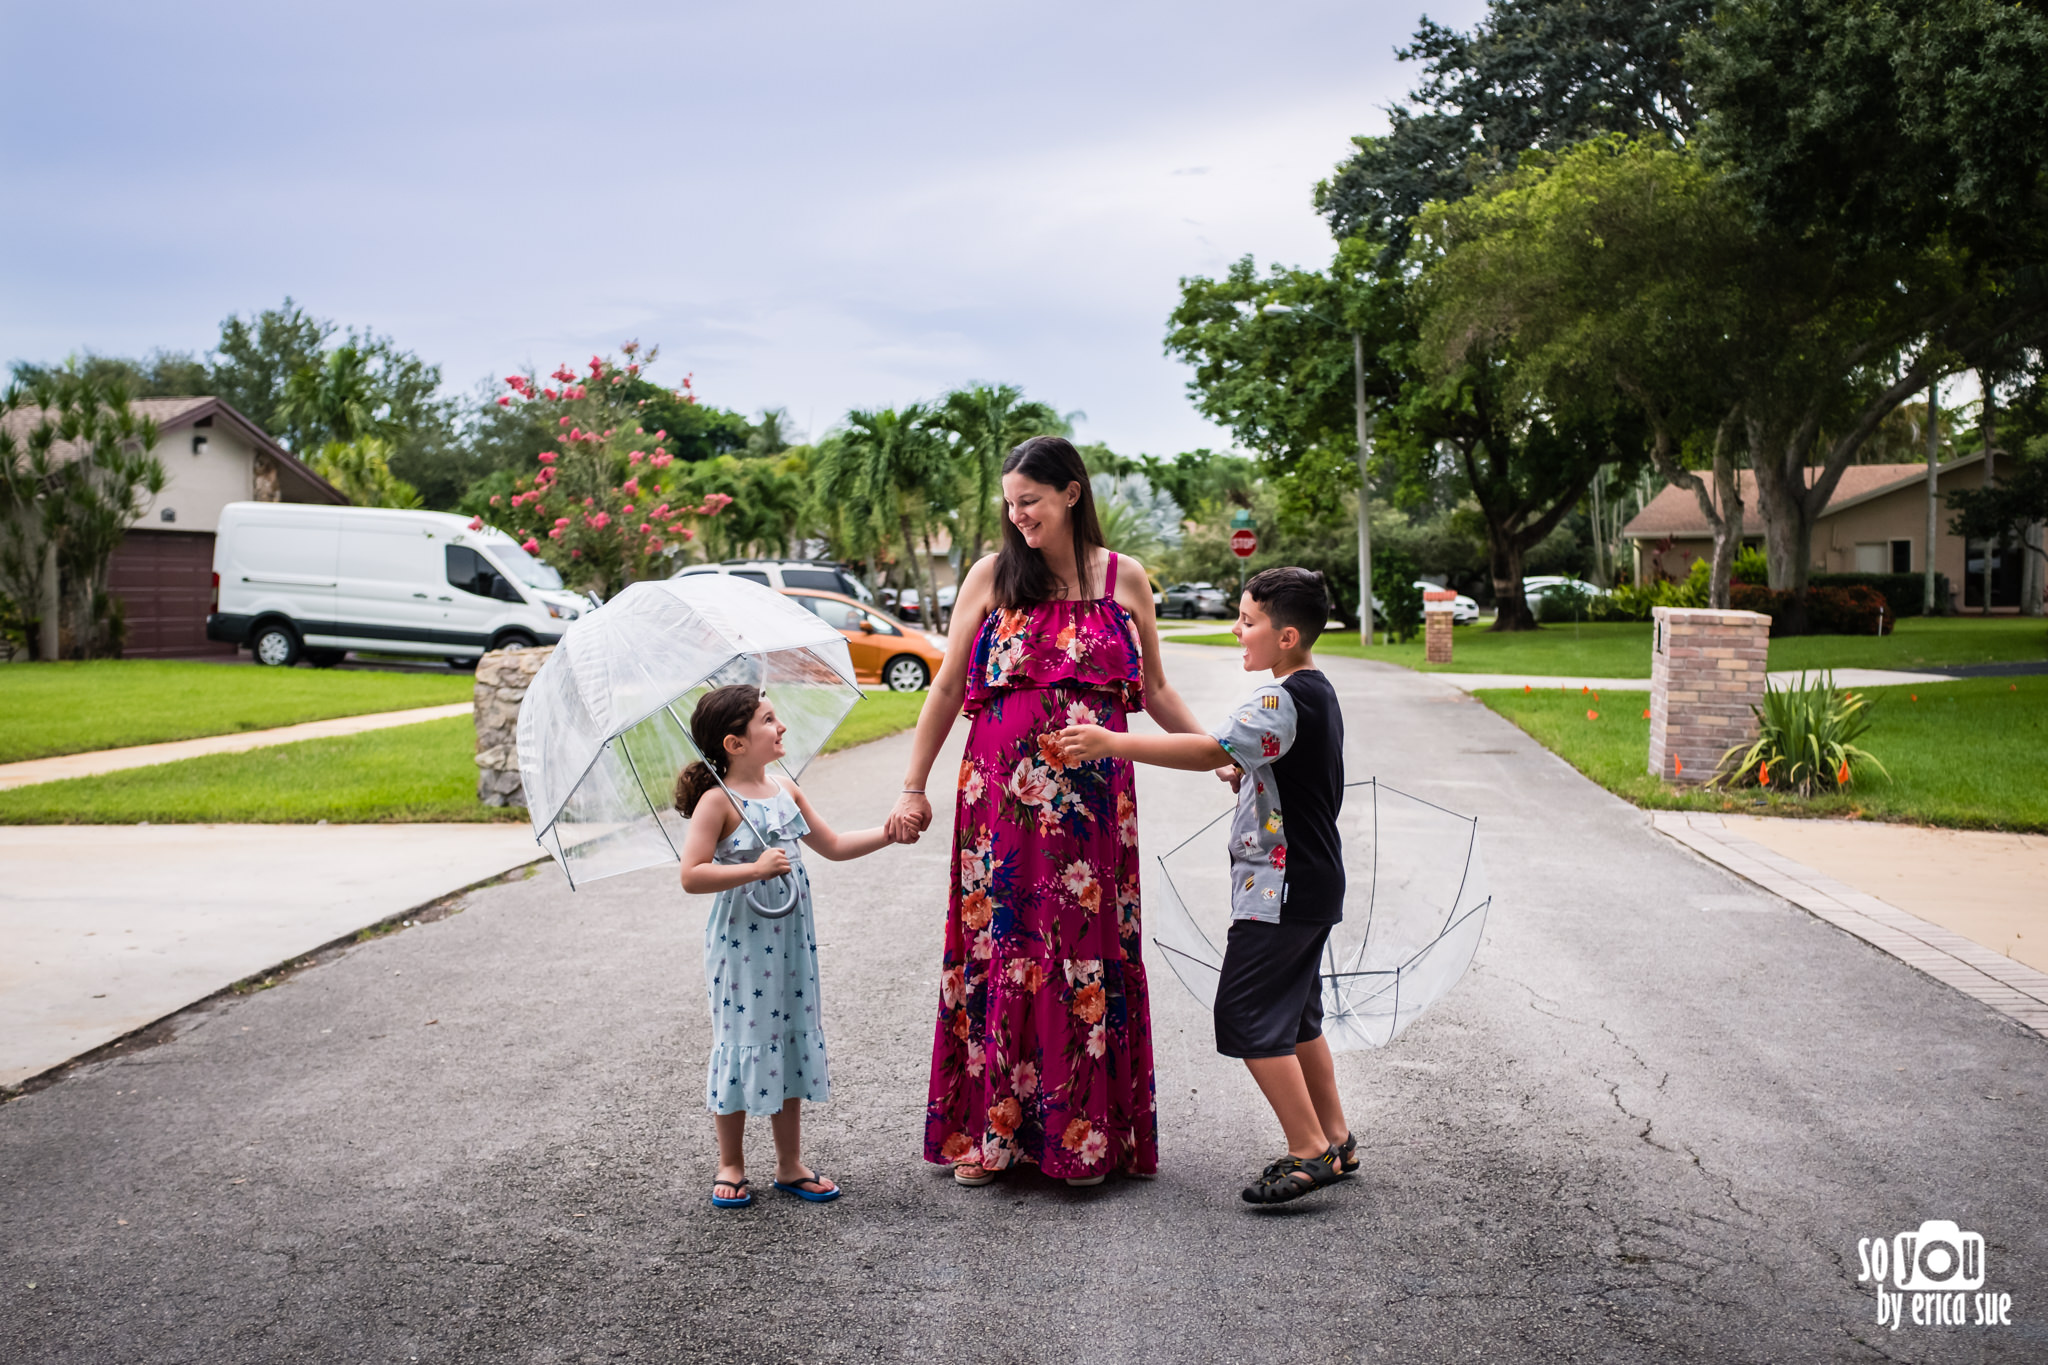 so-you-by-erica-sue-in-home-lifestyle-family-photography-fuji-x100f-cooper-city-fl-0046.jpg